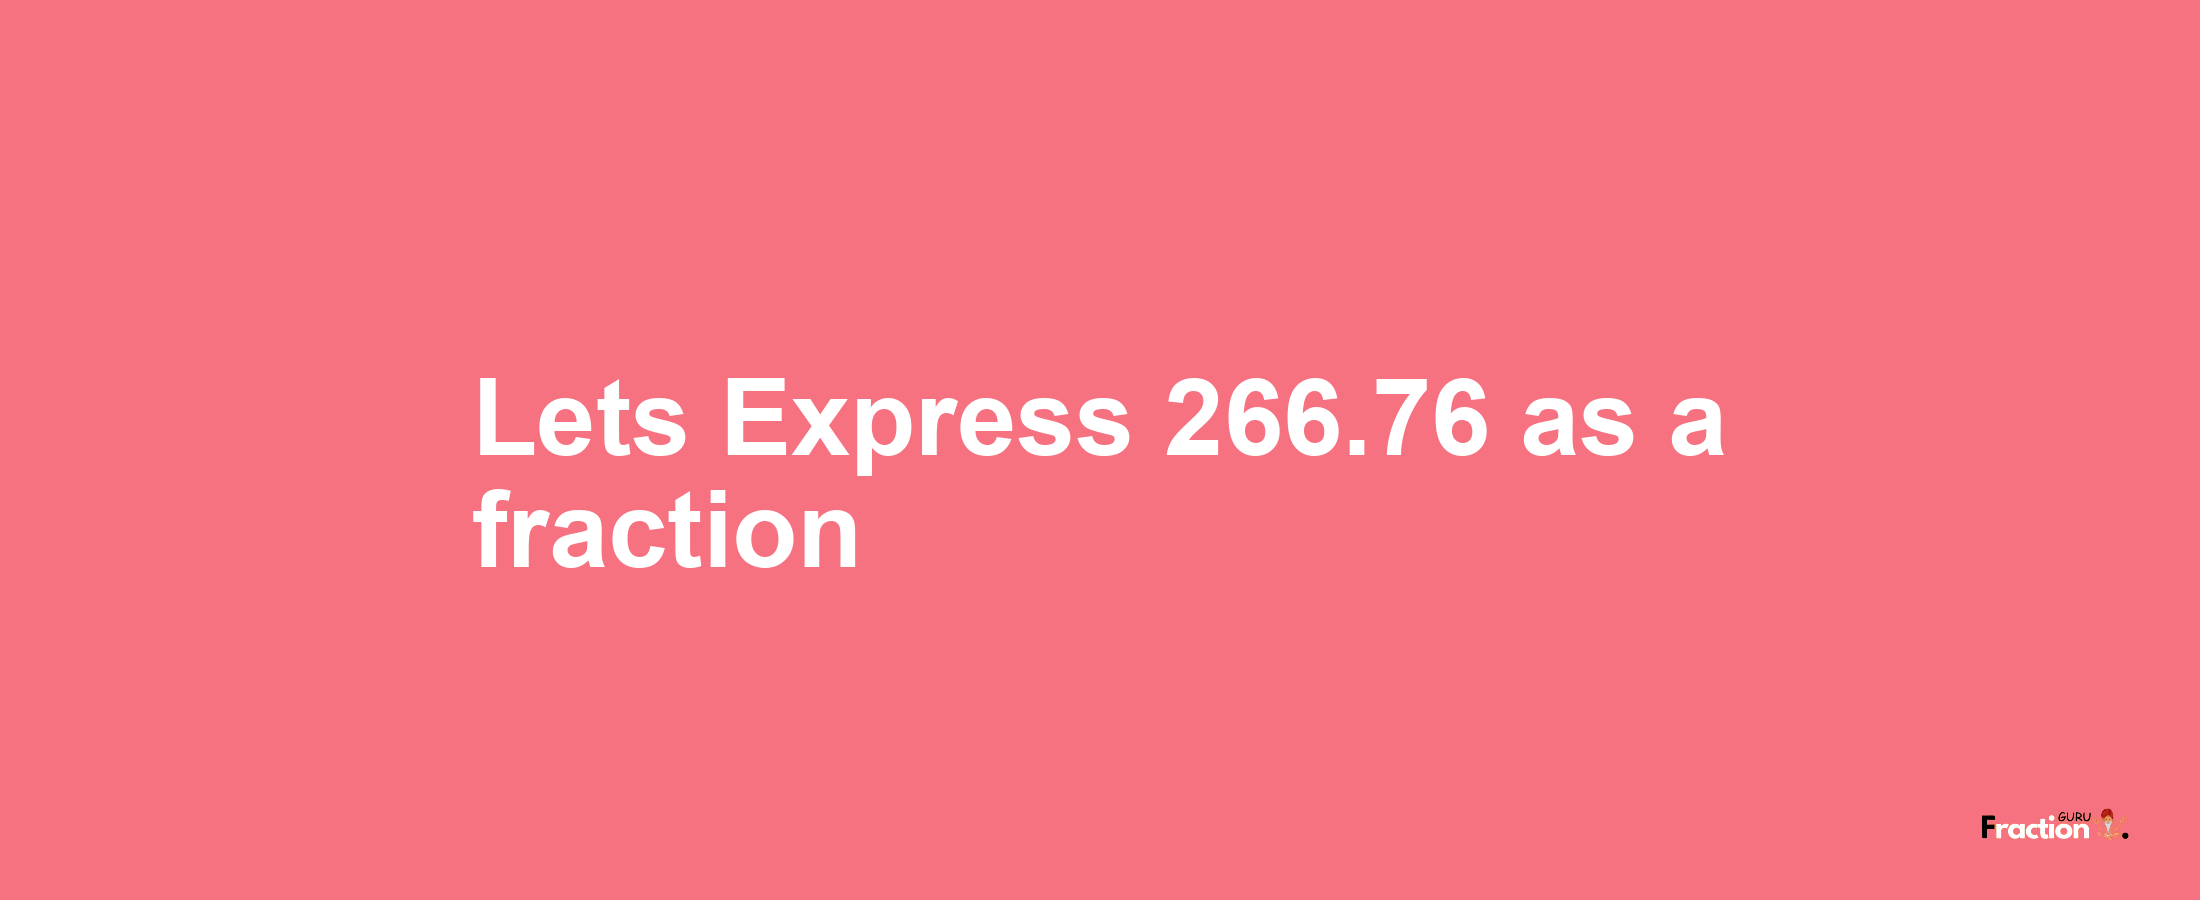 Lets Express 266.76 as afraction